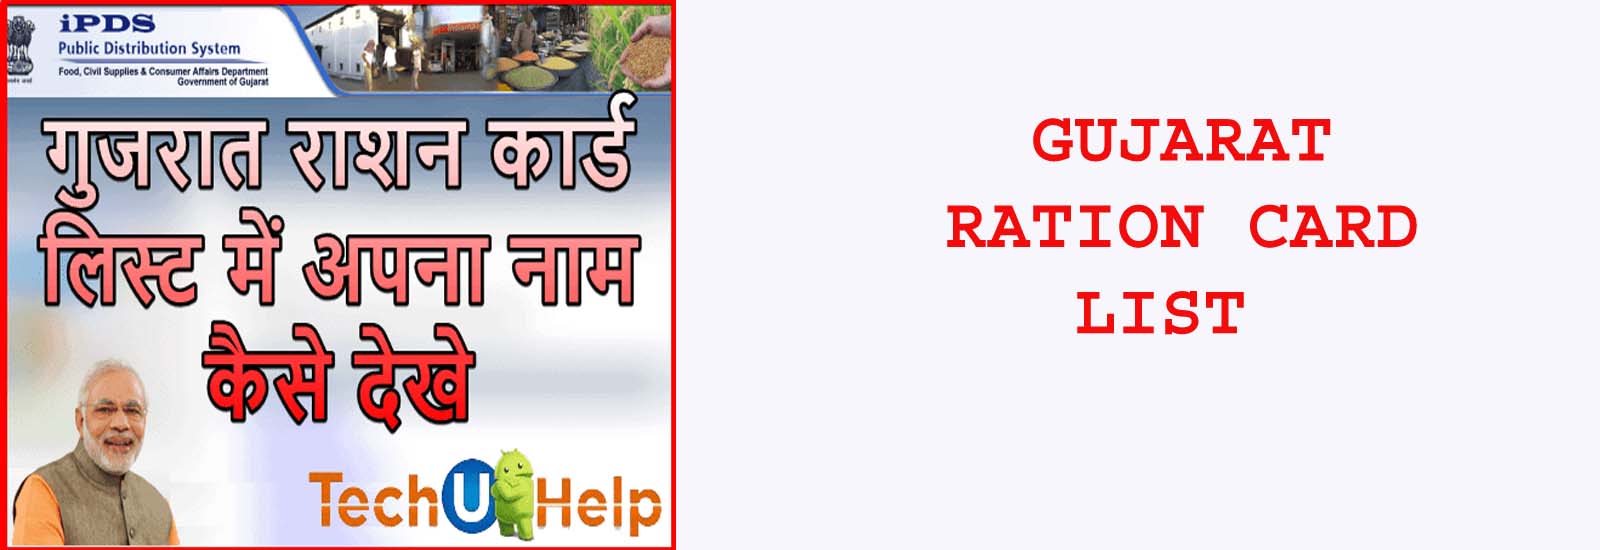 Gujarat Ration Card List : Online Beneficiary Name Wise APL BPL List